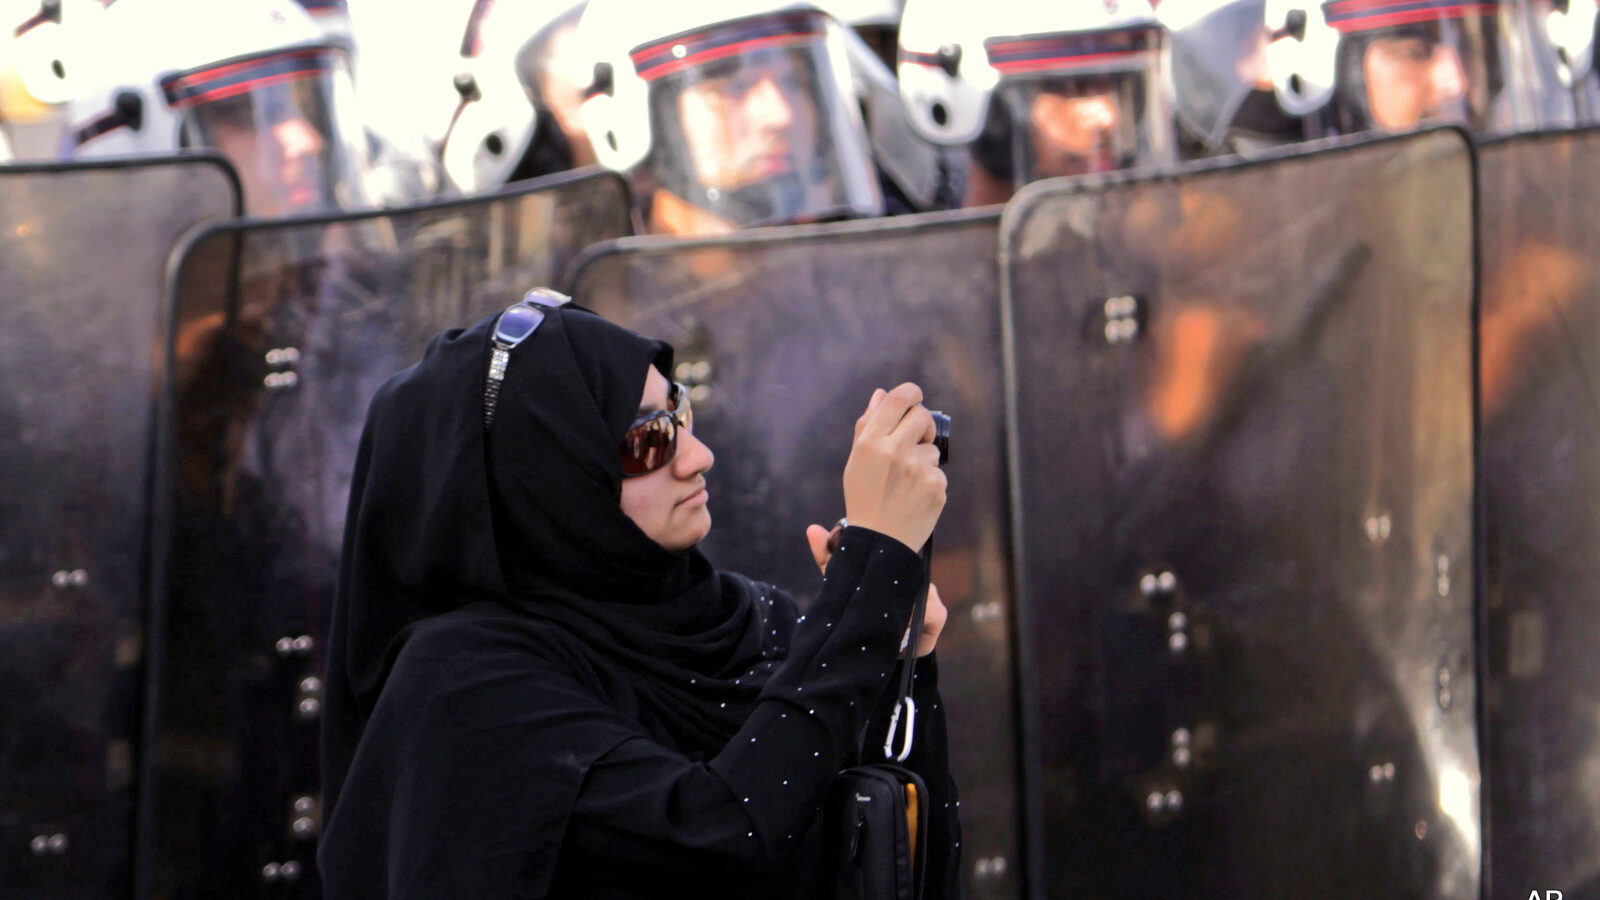 An anti-government protester stands in front of riot police while photographing other demonstrators in Manama, Bahrain. On Tuesday, June, 14, 2016, Bahrain said it has suspended all activities by Al-Wefaq, the largest Shiite opposition political group, and frozen its assets amid a widening crackdown on dissent, five years after the country’s Arab Spring protests.